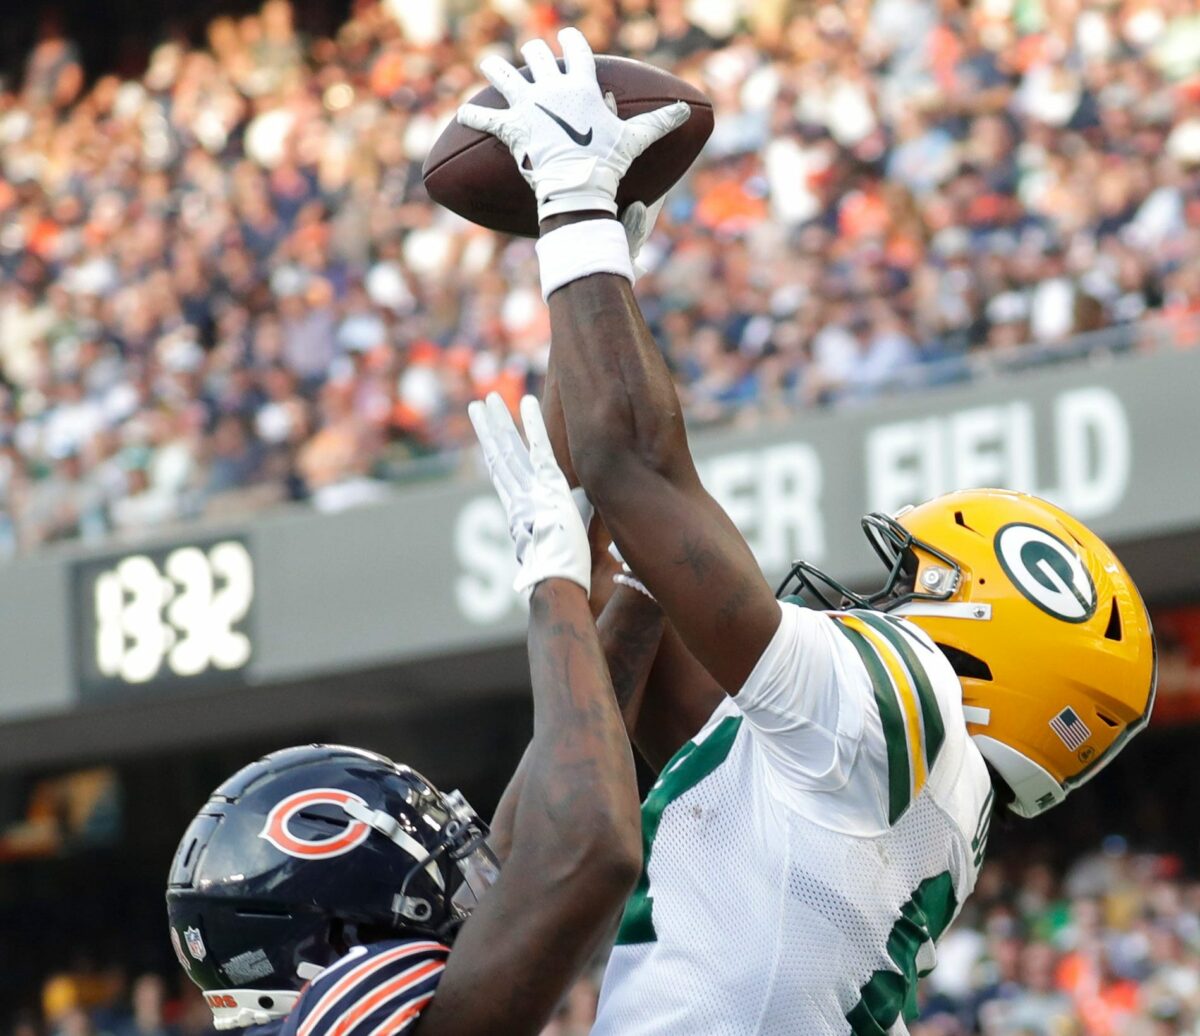 NFC North roundup: Vikings and Bears fall, Packers prevail in Week 1